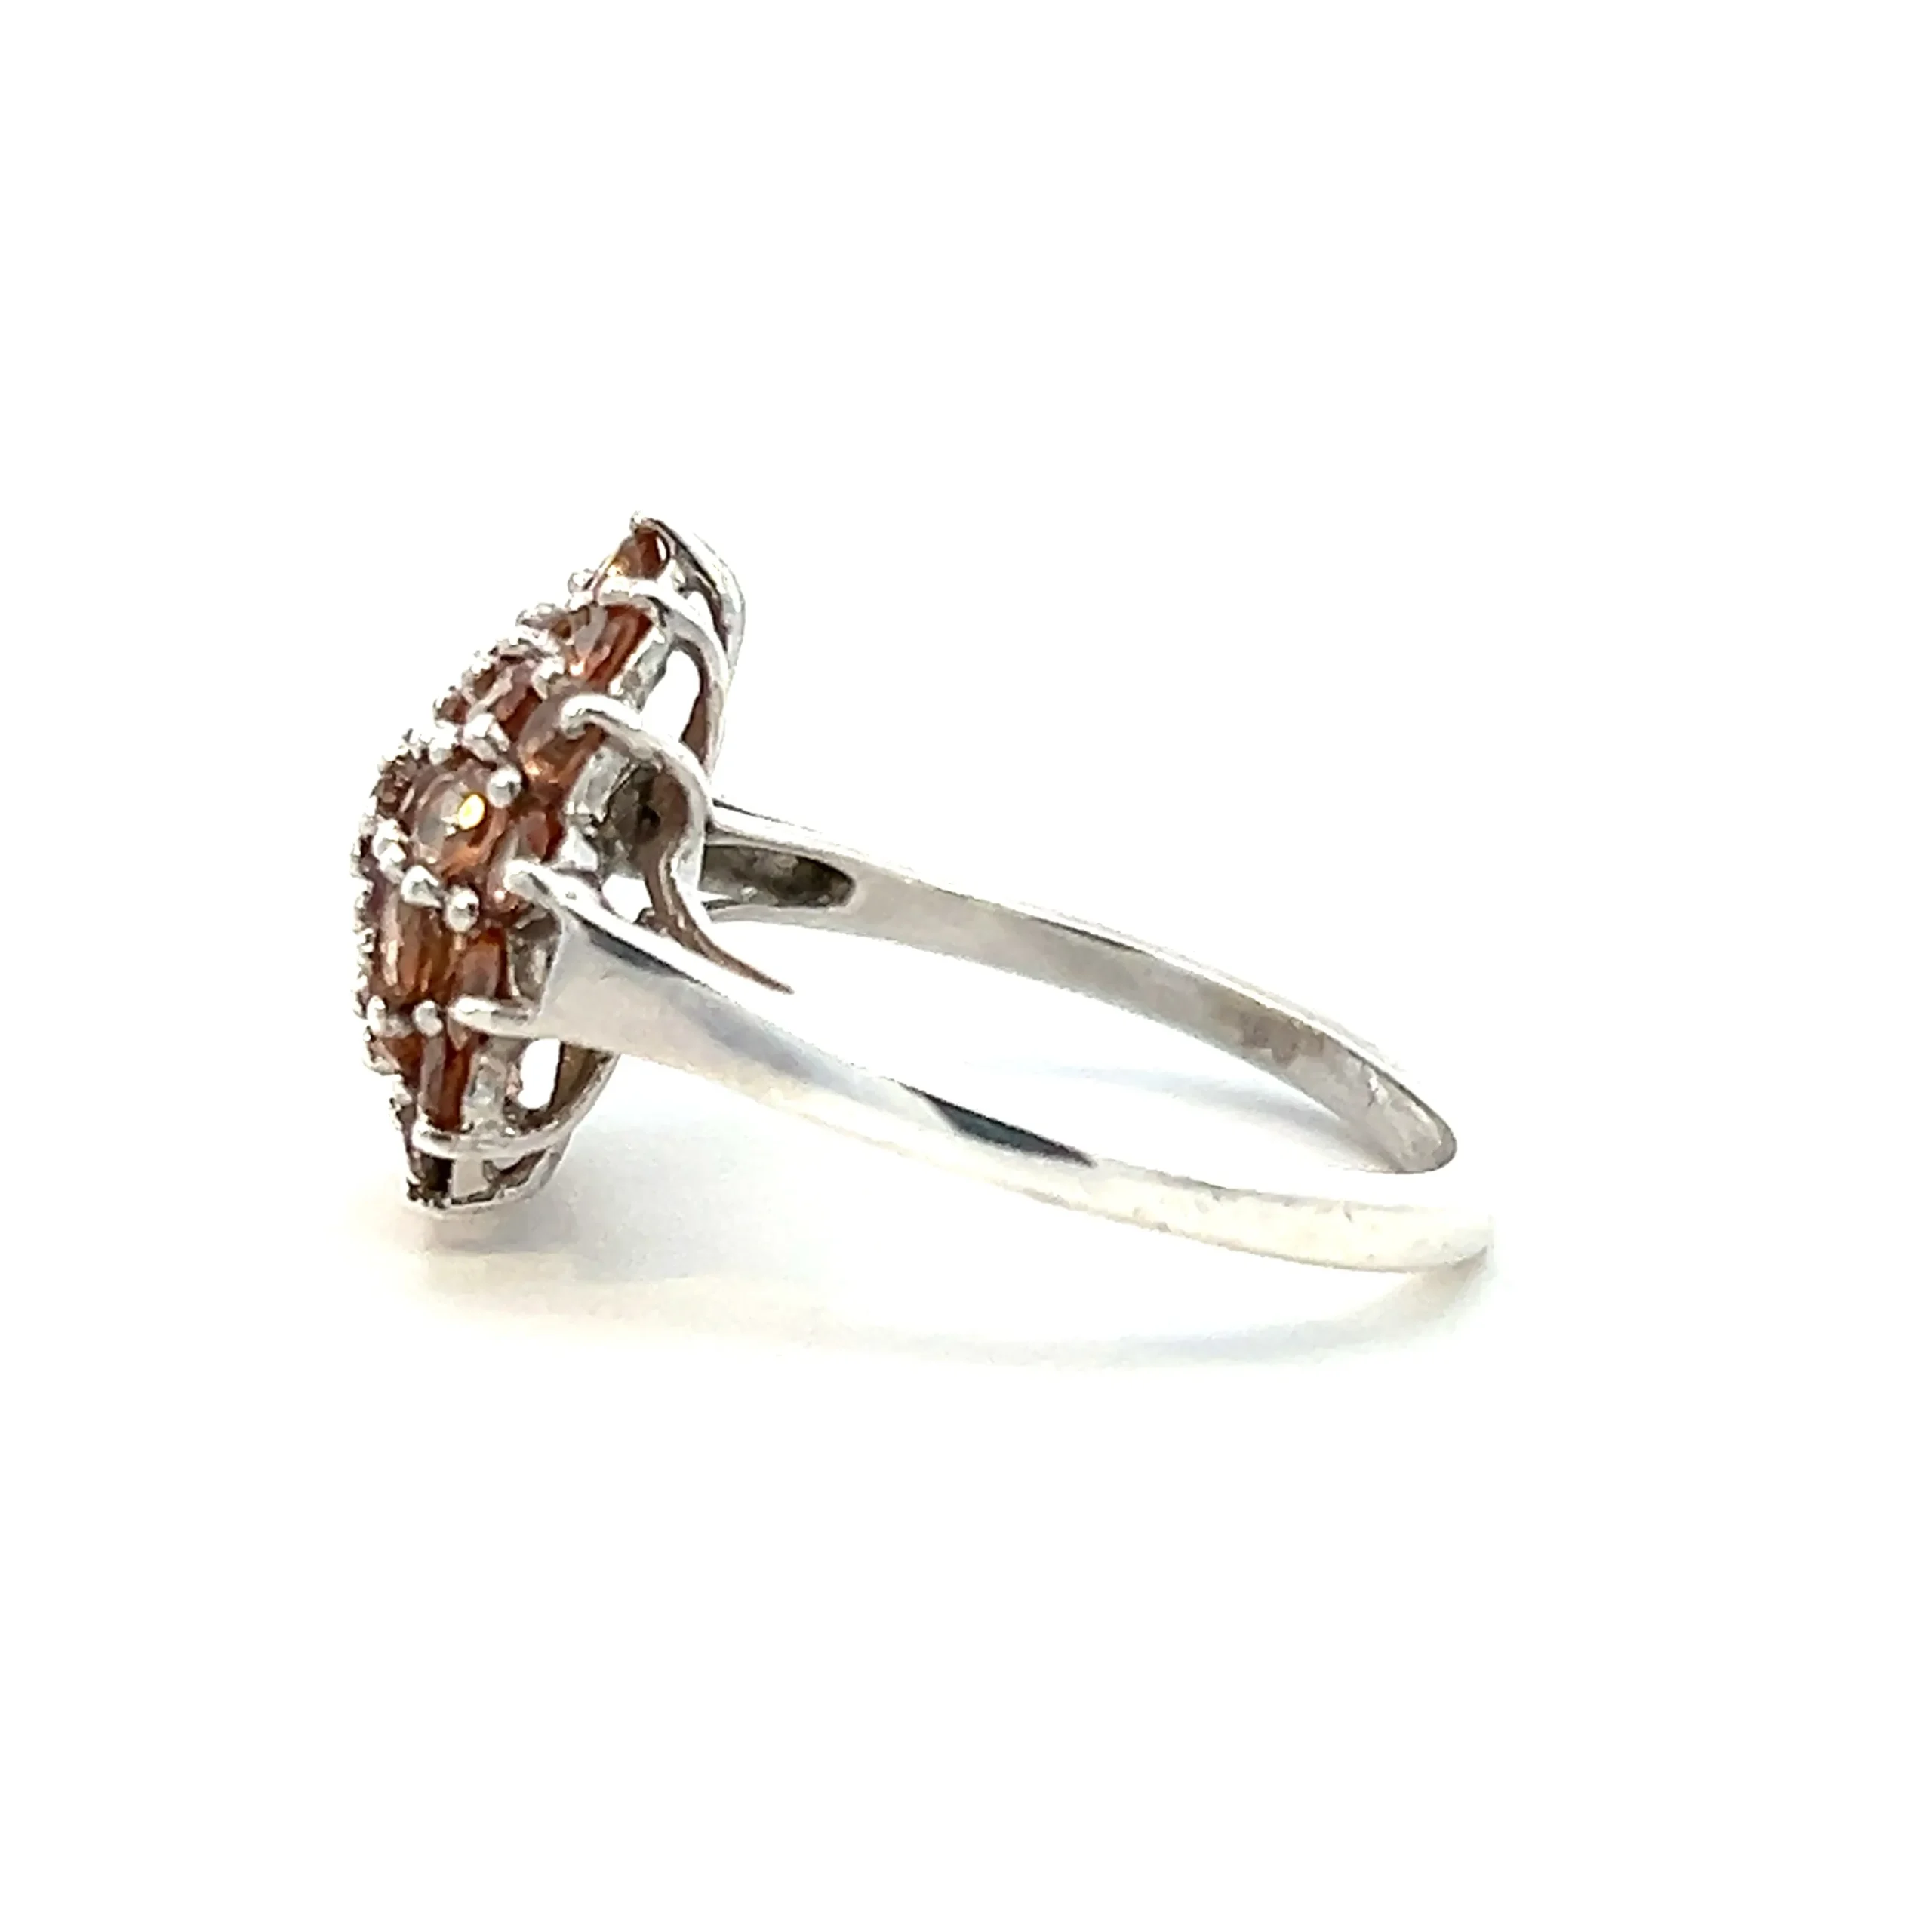 One Estate Bronze Citrine Ring crafted from sterling silver featuring 33 round bronze citrines measuring 2.5mm each in pave settings in a round multi-halo cluster floral motif.